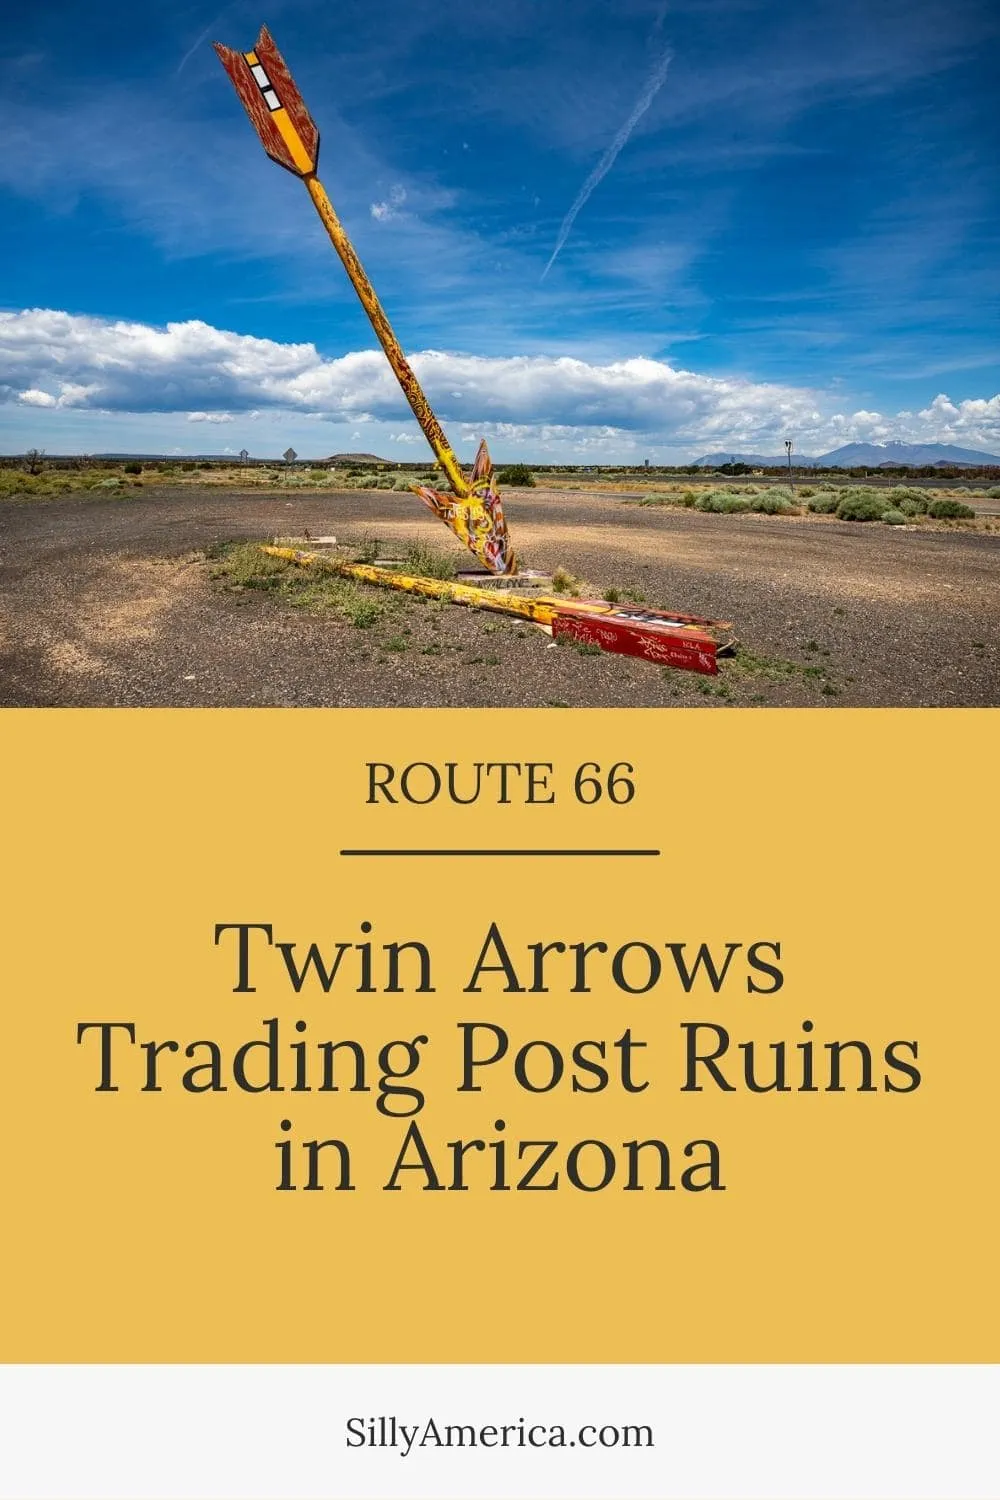 While there have been many efforts lately to restore and revive parts of historic Route 66, other parts have seen better days and have questionable futures ahead. One such attraction is the Twin Arrows Trading Post Ruins in Arizona. Which, nowadays, are more arrow than arrows. Visit this Route 66 roadside attraction on your Arizona road trip! Add it to your travel itinerary and bucket list! #Route66 #ArizonaRoute66 #Route66RoadTrip #Route66RoadsideAttraction #RoadTrip #RoadsideAttraction